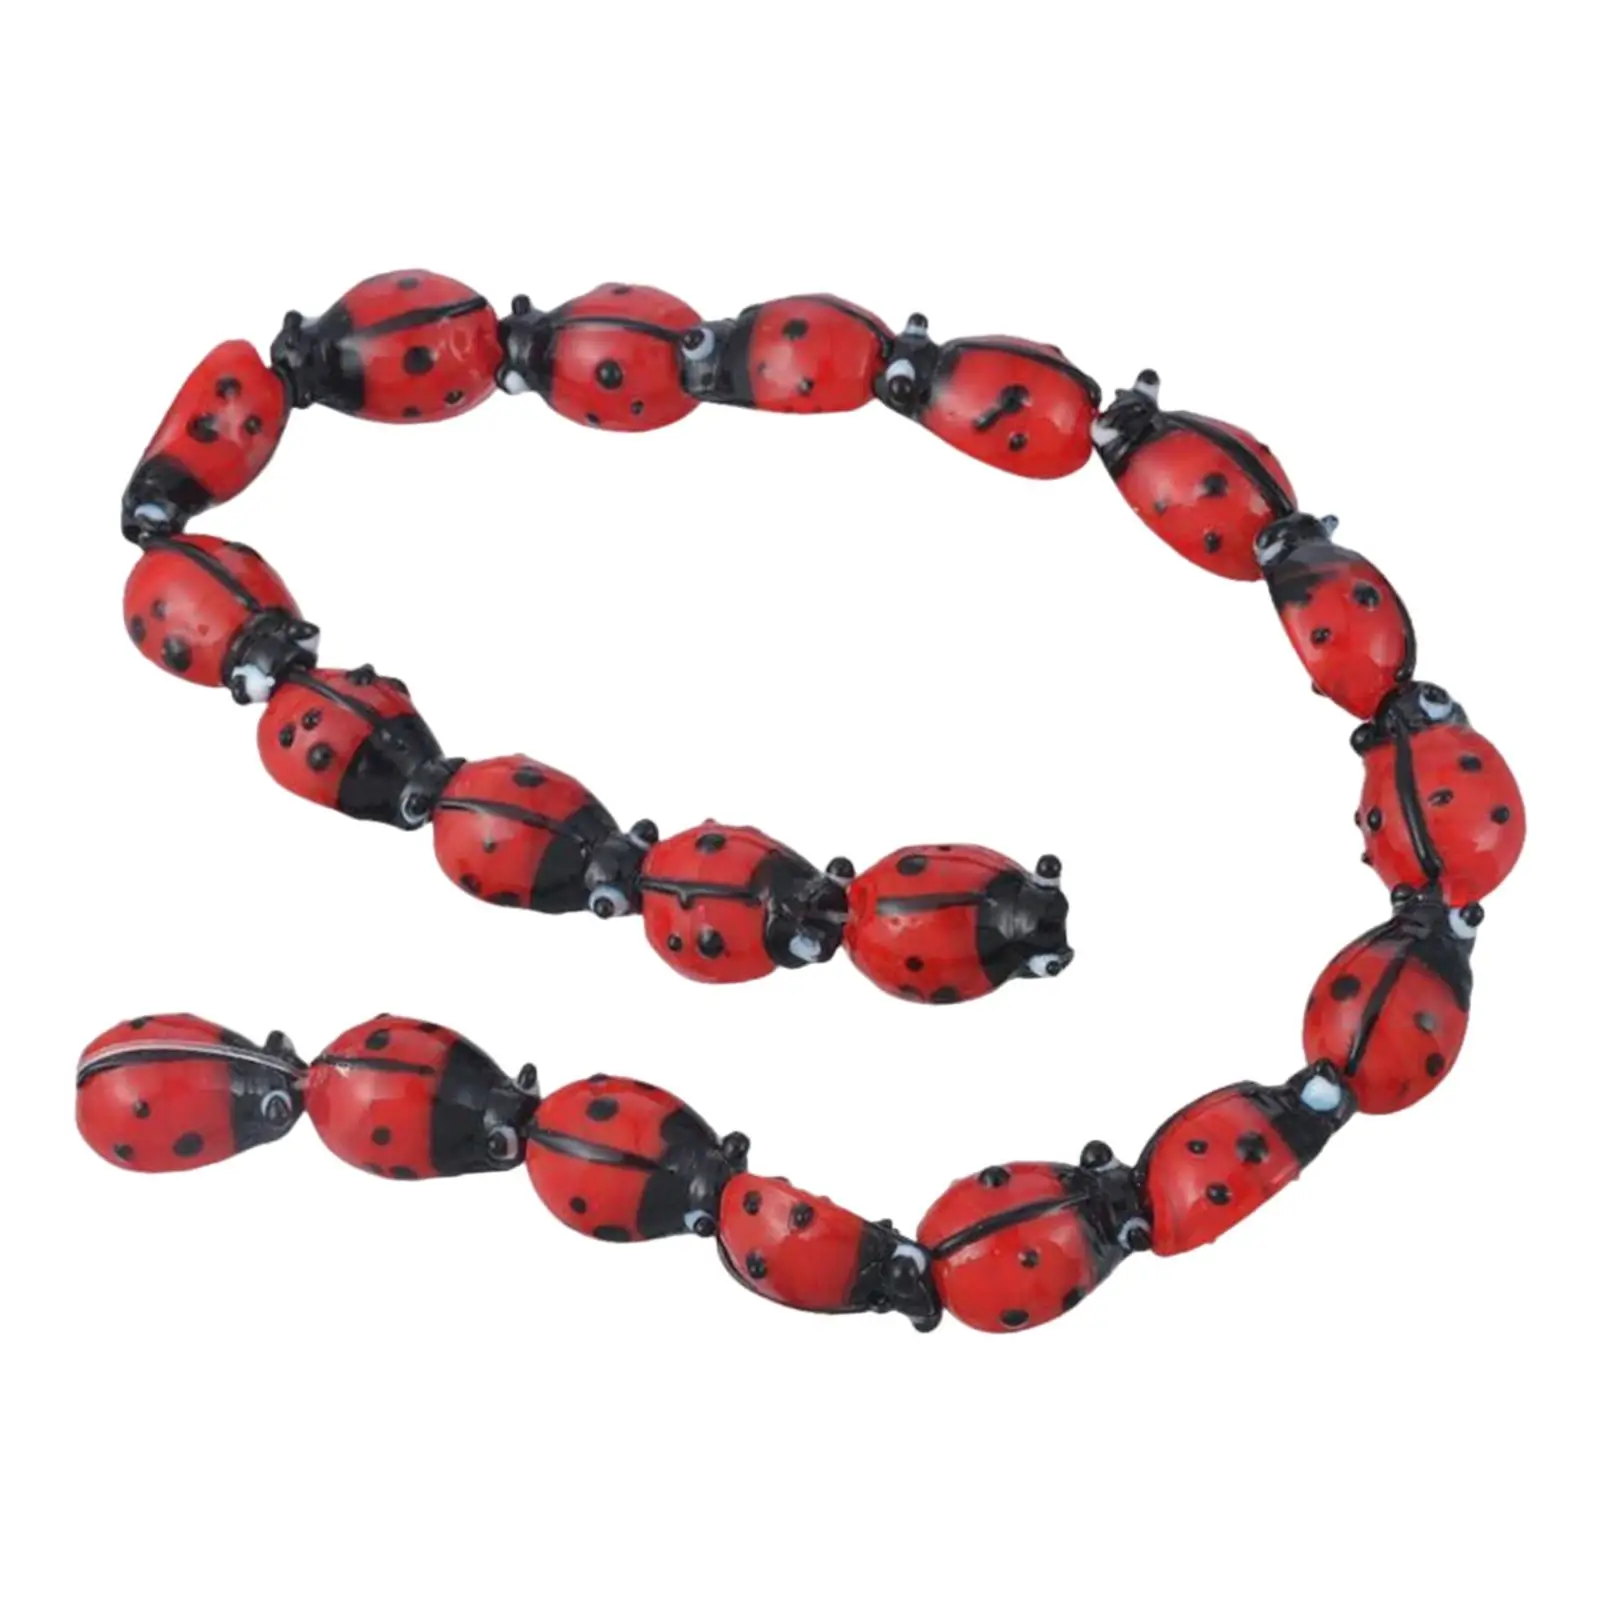 Cute Beetle Spacer Beads Set Crafts Carved Accessories Supplies Charm Red for Craft Making Decoration Pendant Halloween Earrings